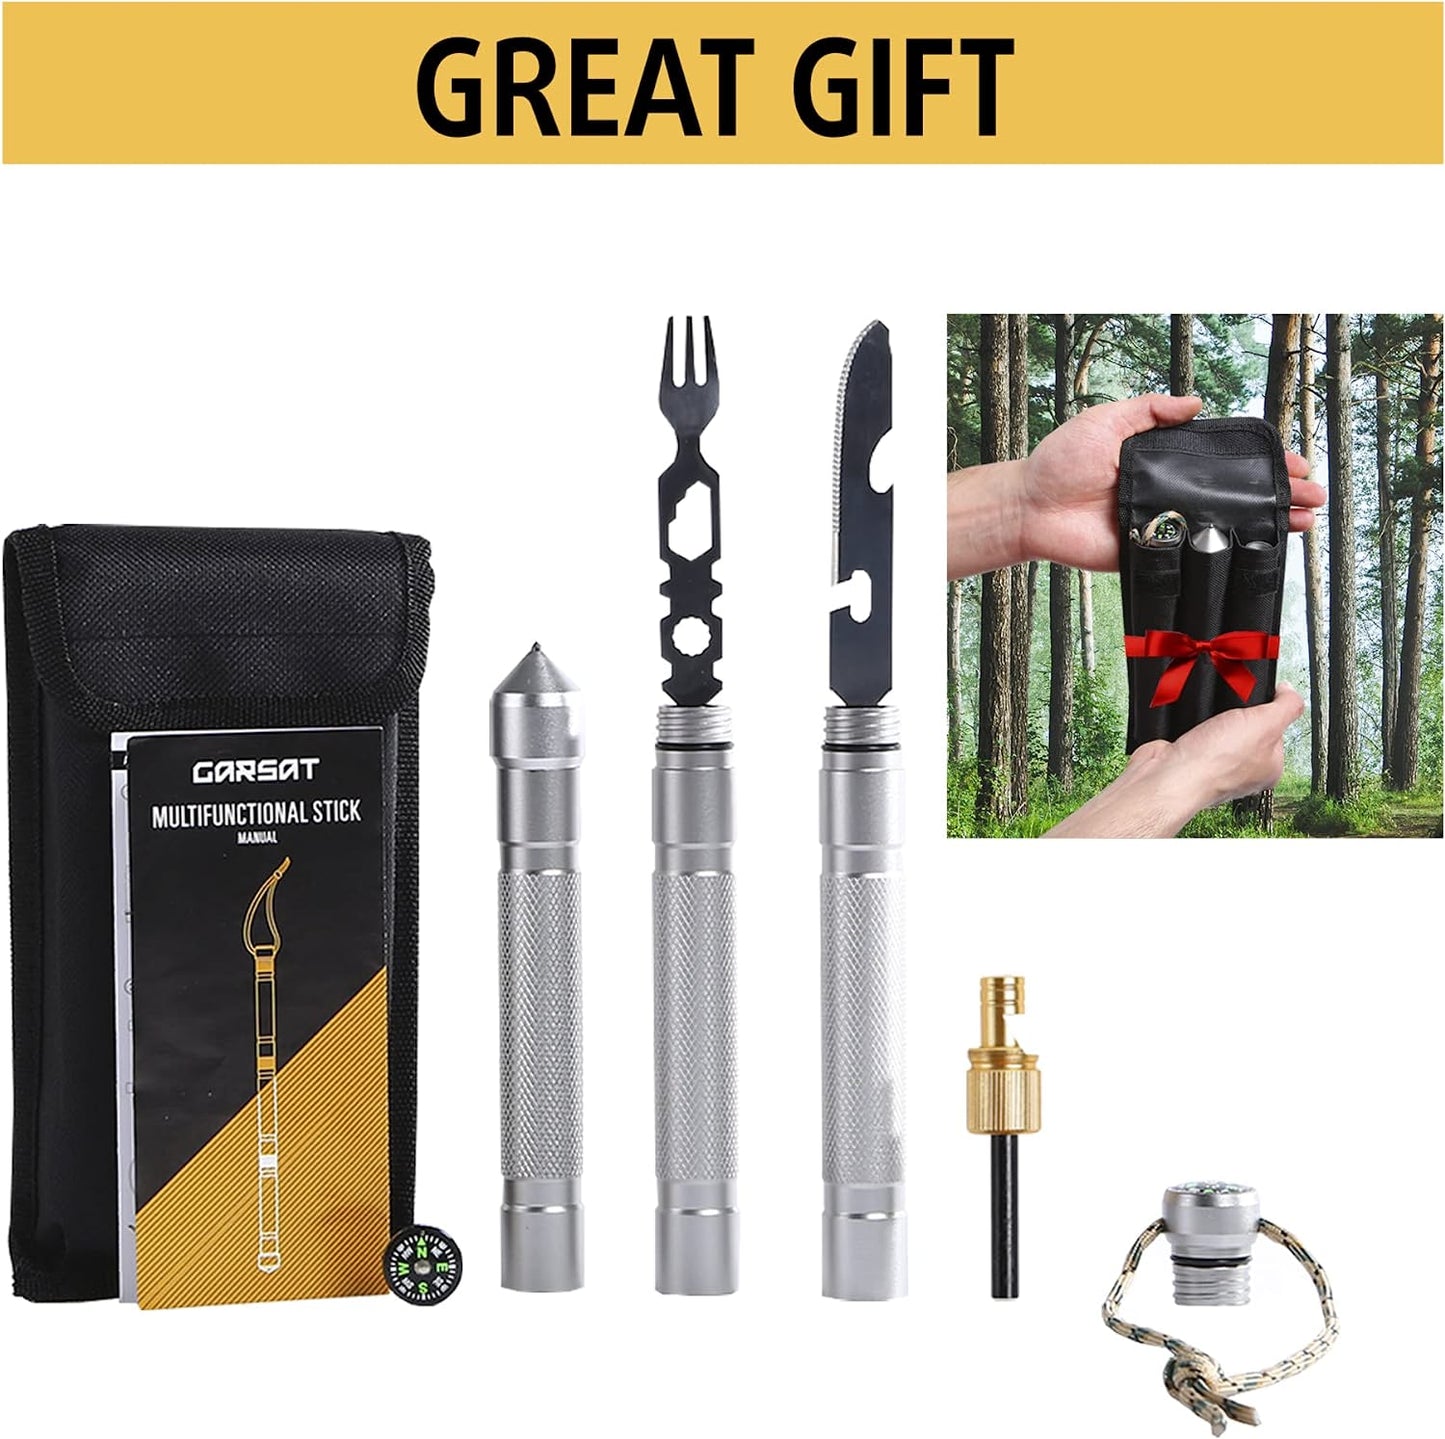 6 Tactical Multi Tools in One Tactical Survival Hiking Stick for Camping Gear and Walking, Multitool with Knife, Fork, Emergency Car Glass Breaker, Whistle, Compass Outdoor Tactical Tools